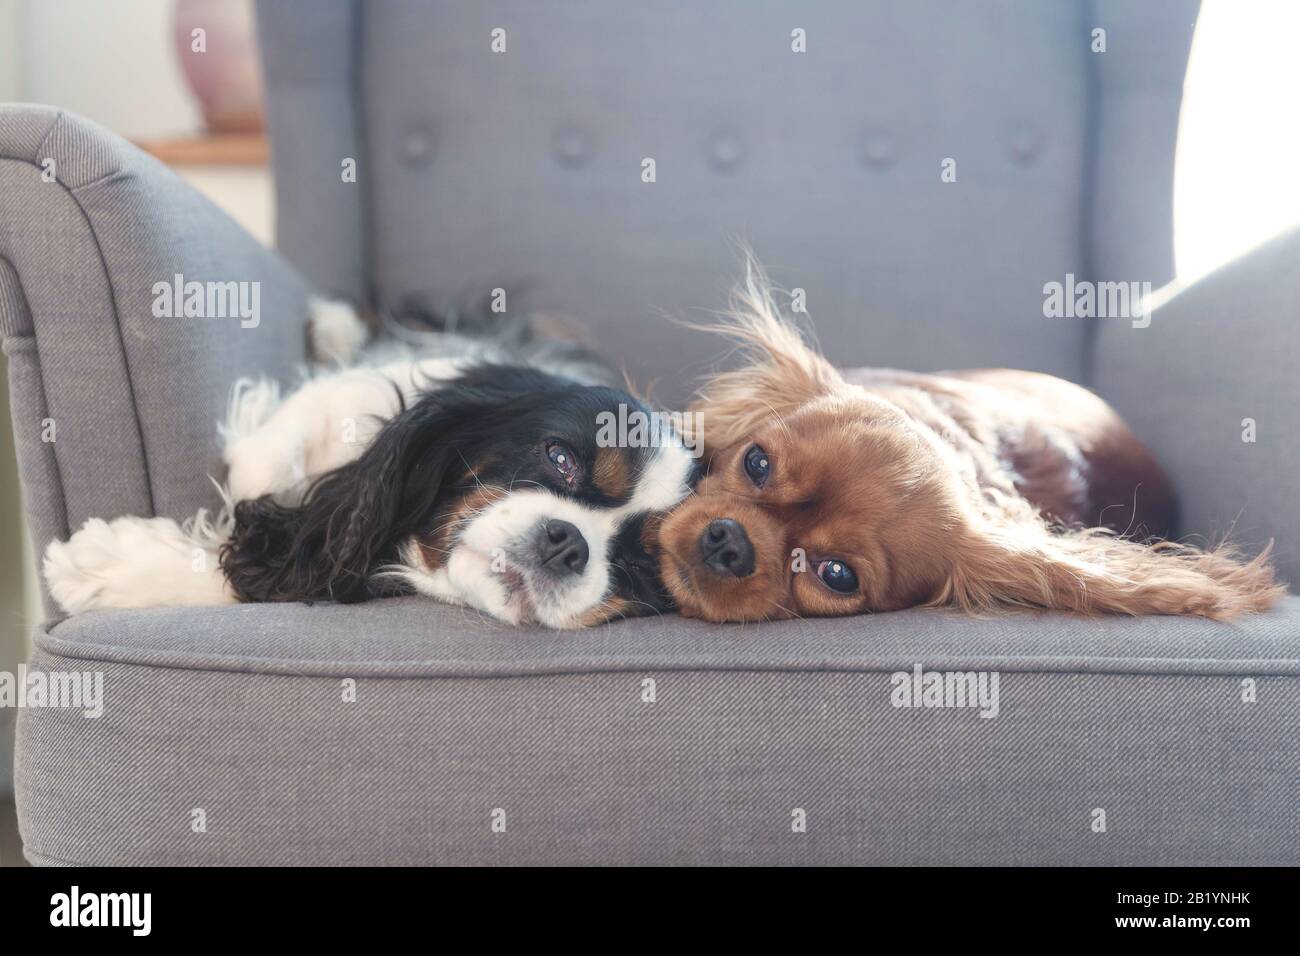 Two cute dogs resting together on the armchair Stock Photo